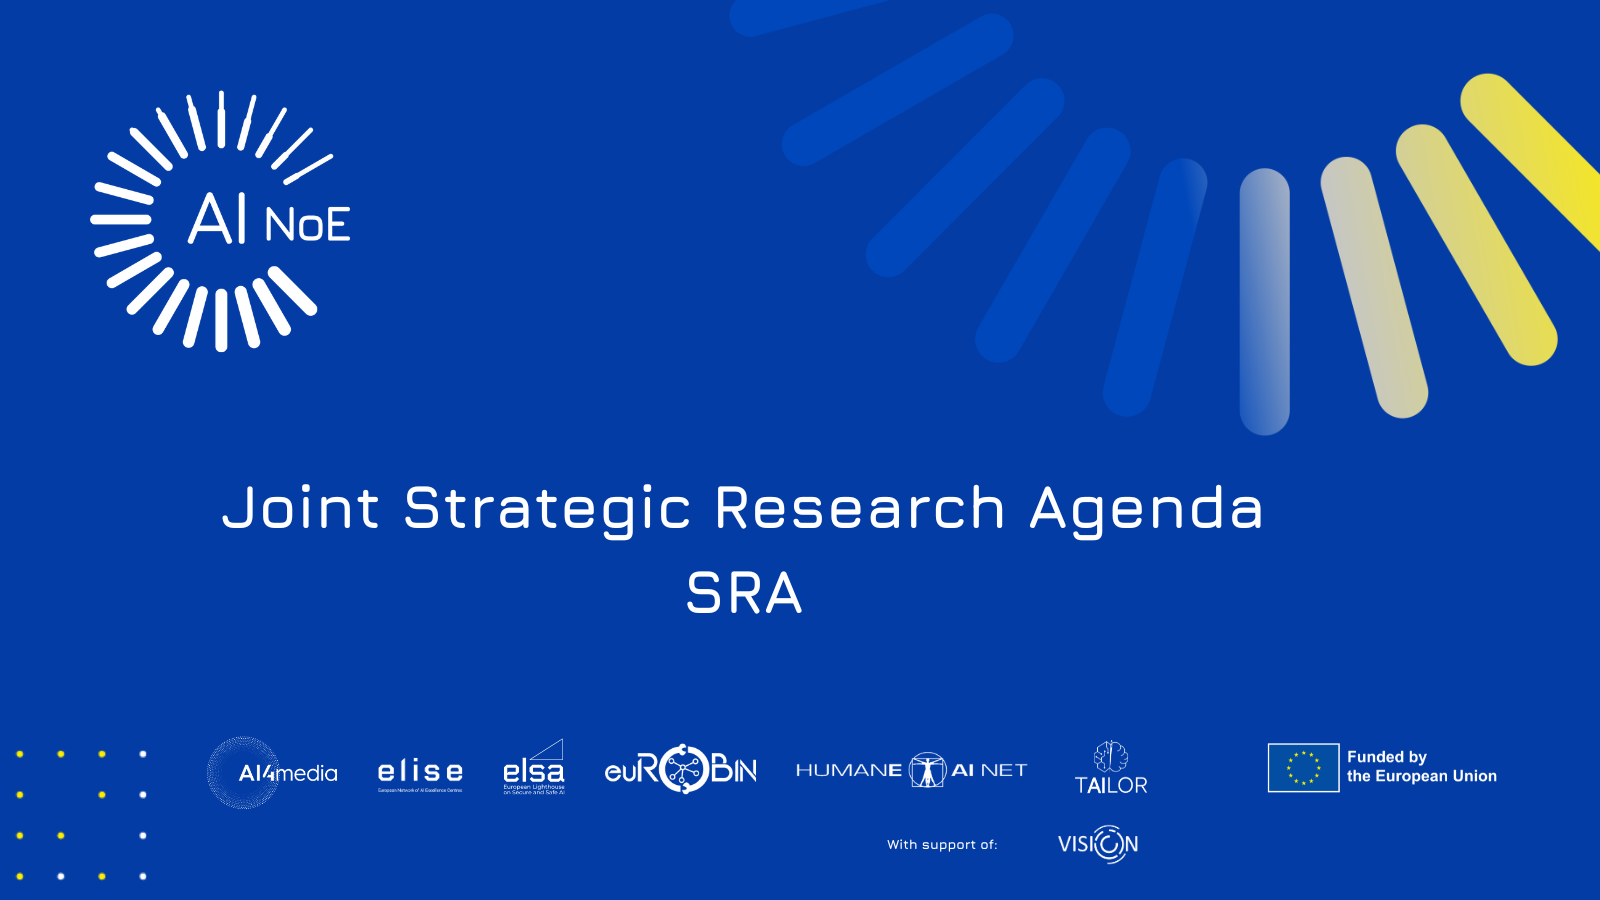 Strategic Research Agenda Vision4AI banner with logos and project visuals